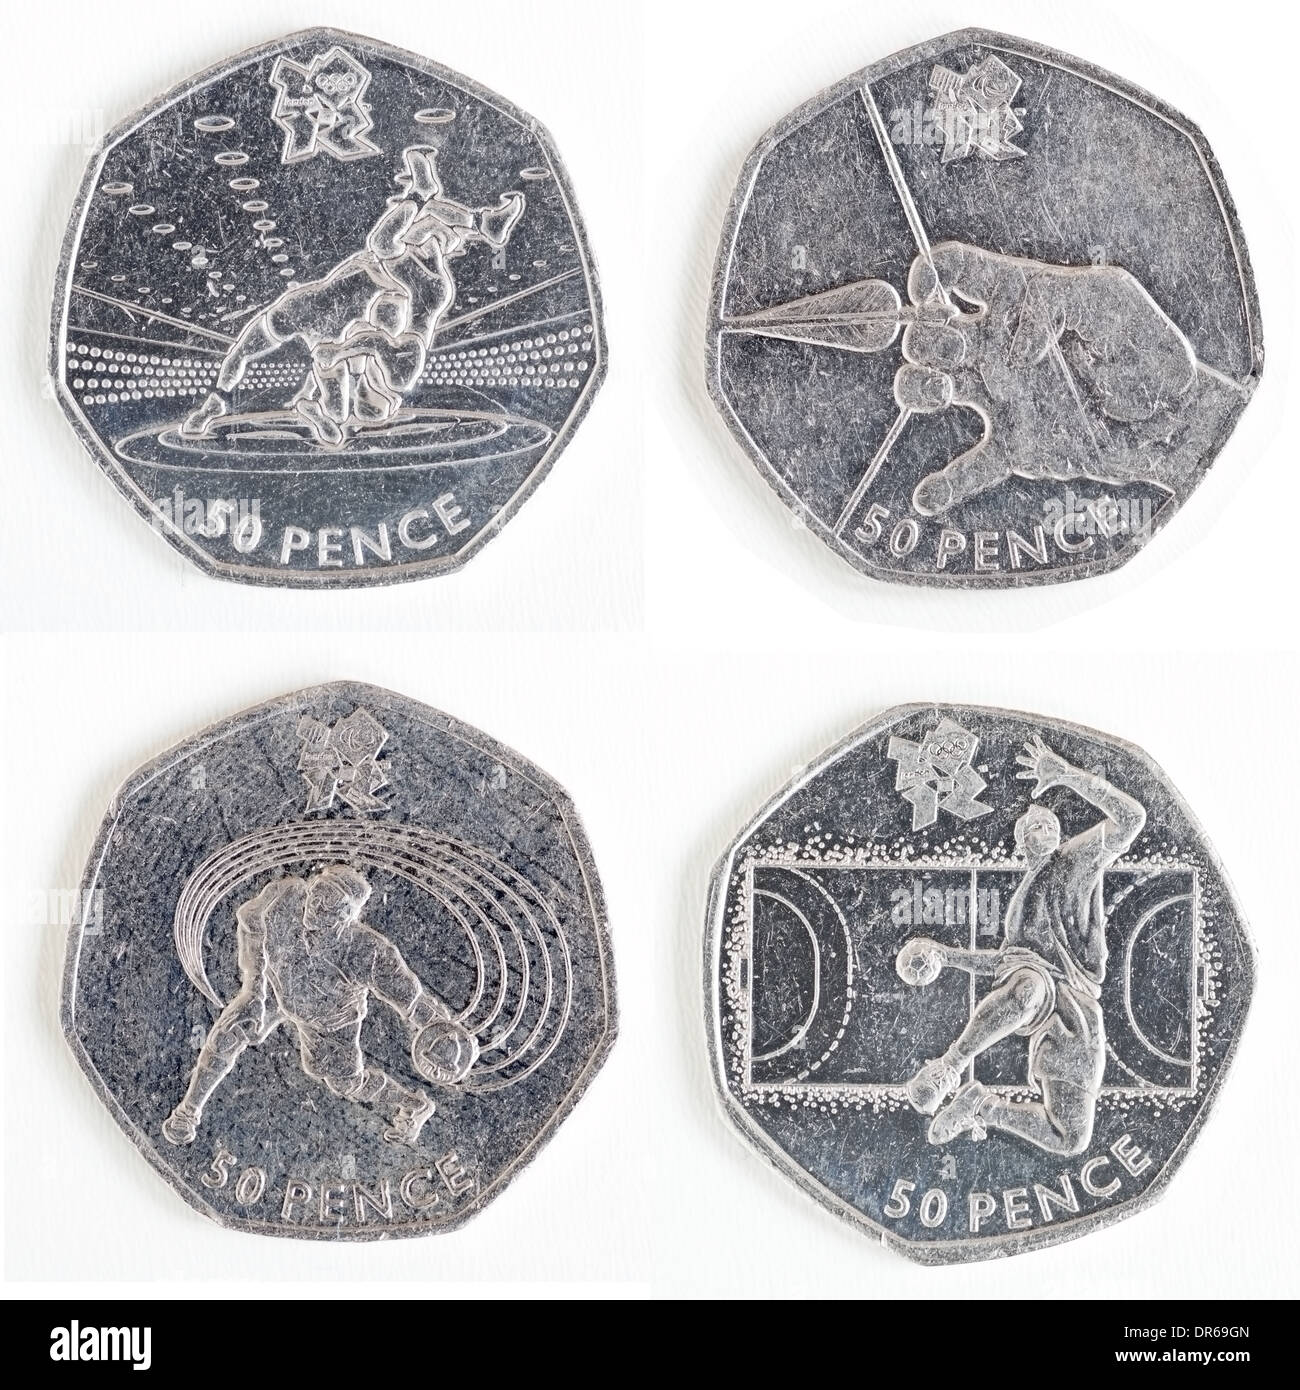 Collection of London Olympics Games commemorative 50 pence coins, reverse side Stock Photo